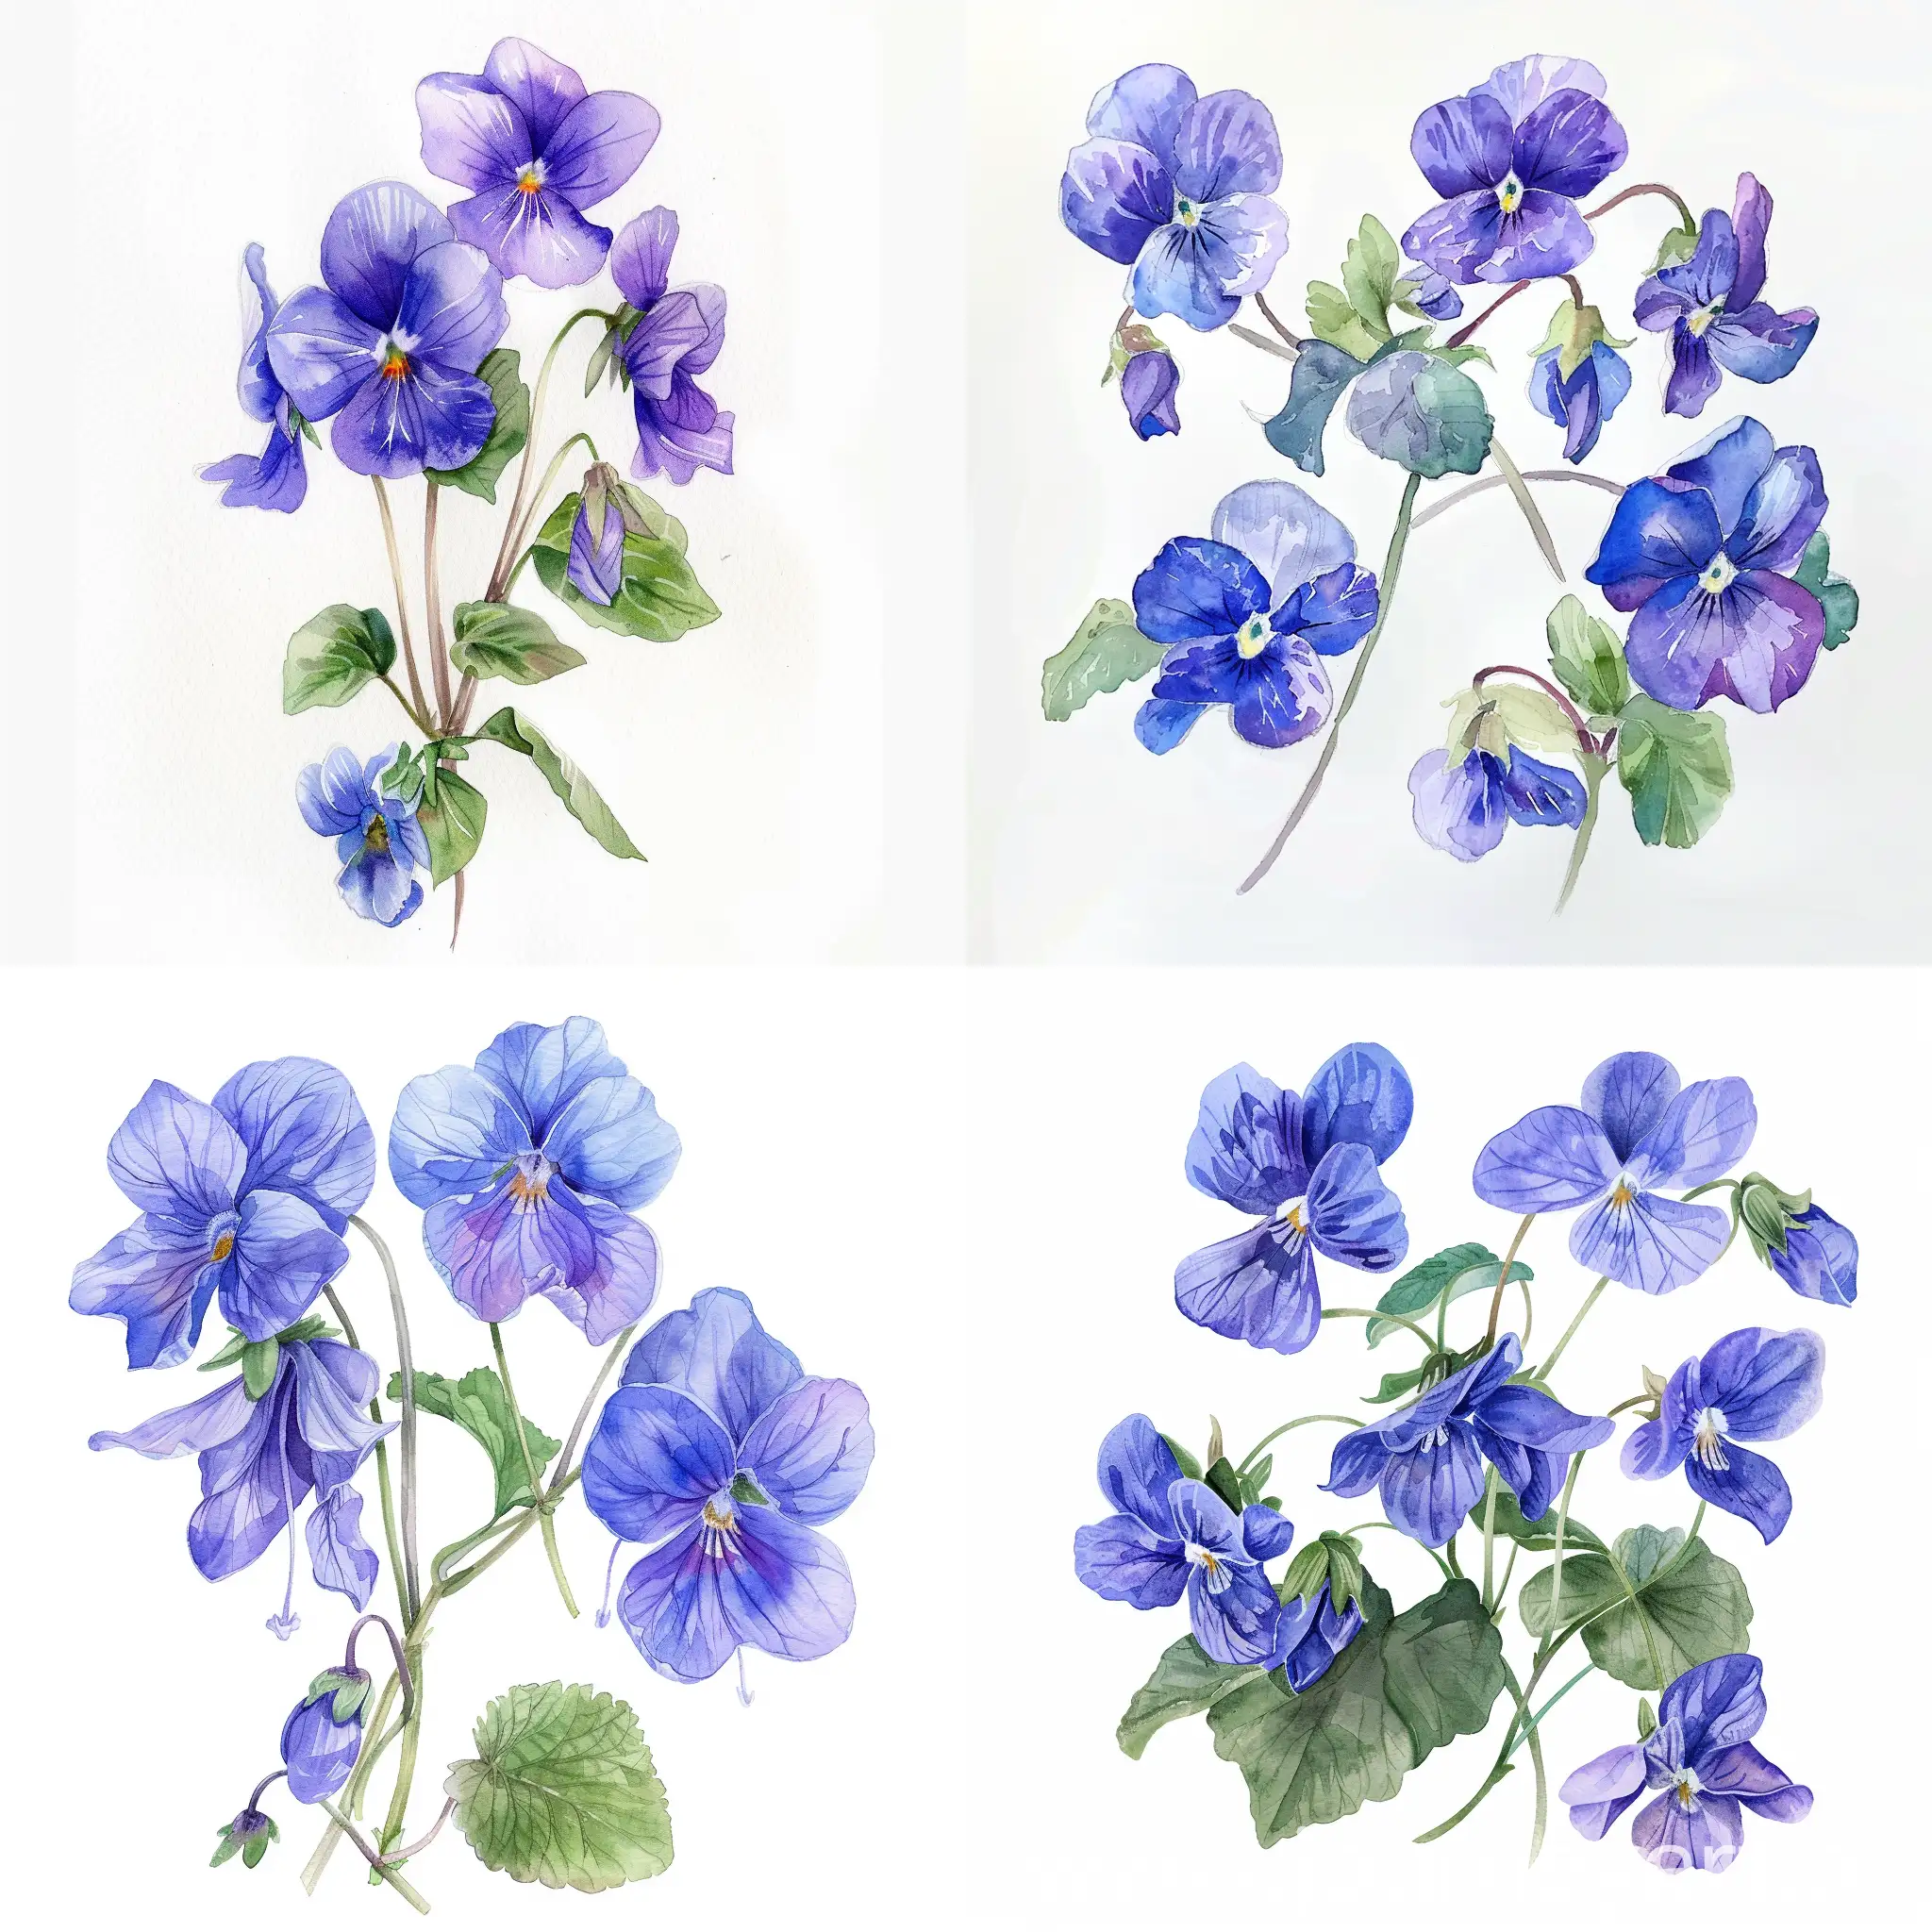 Soft-HandPainted-Watercolor-Violets-on-White-Background